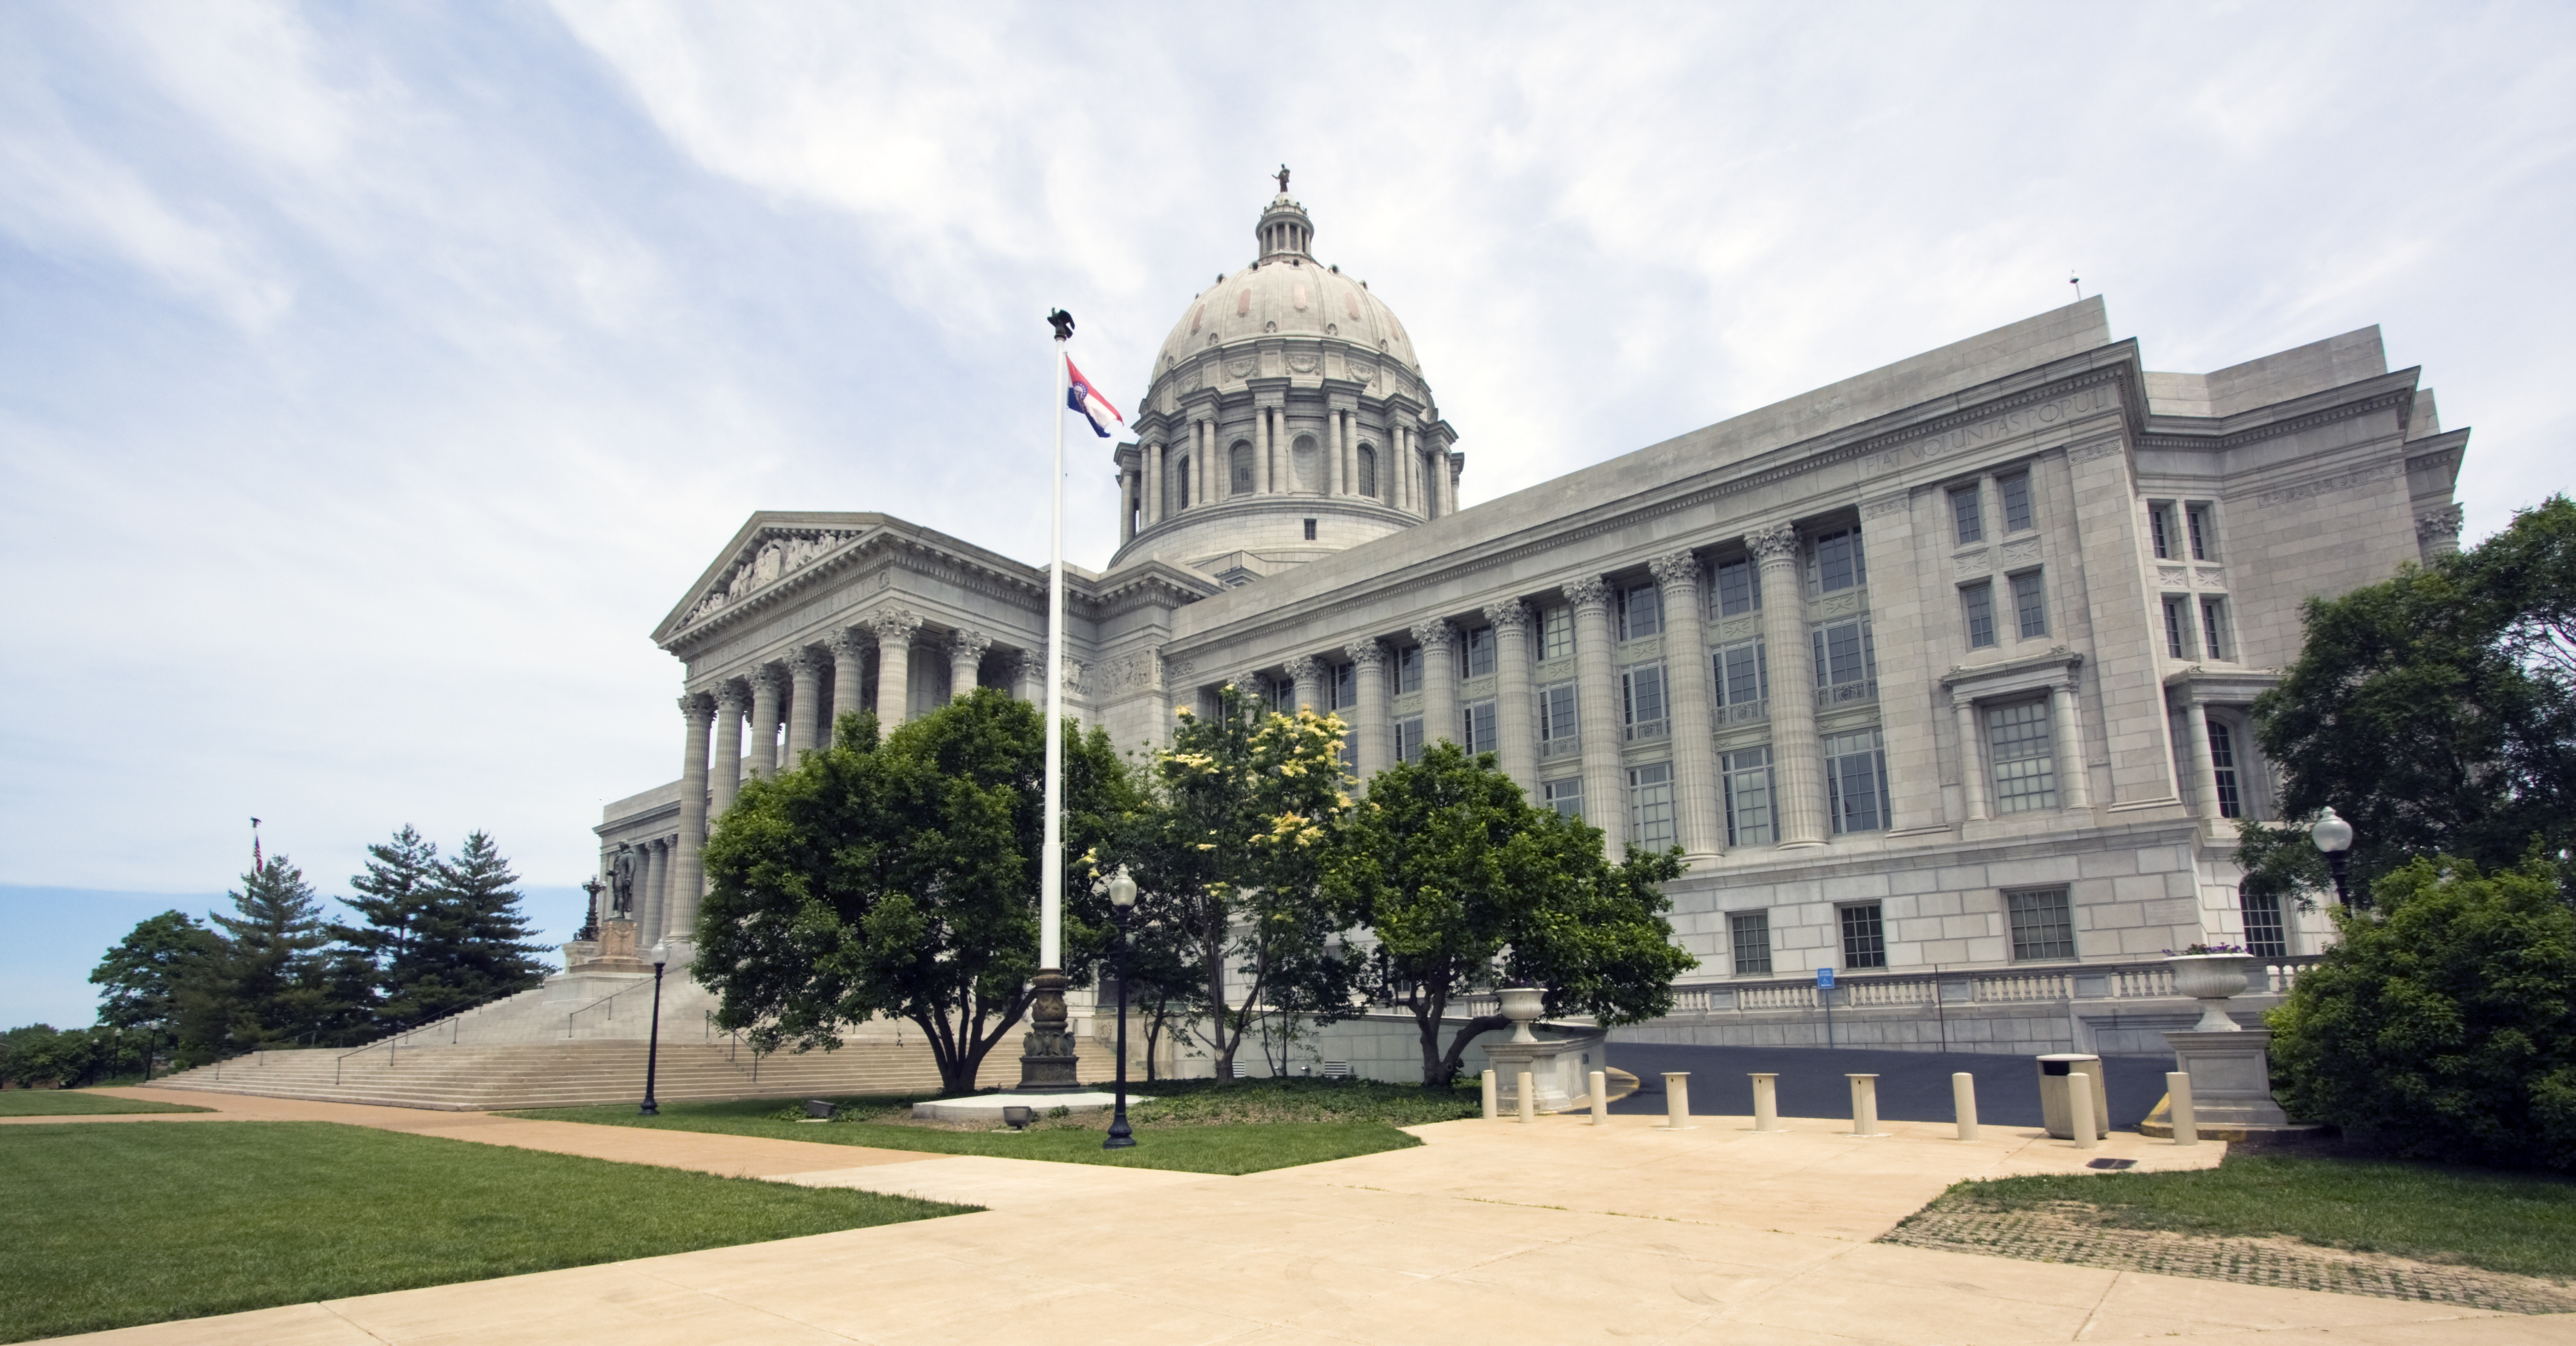 July 11 Second Saturday Meeting: Update on Missouri General Assembly